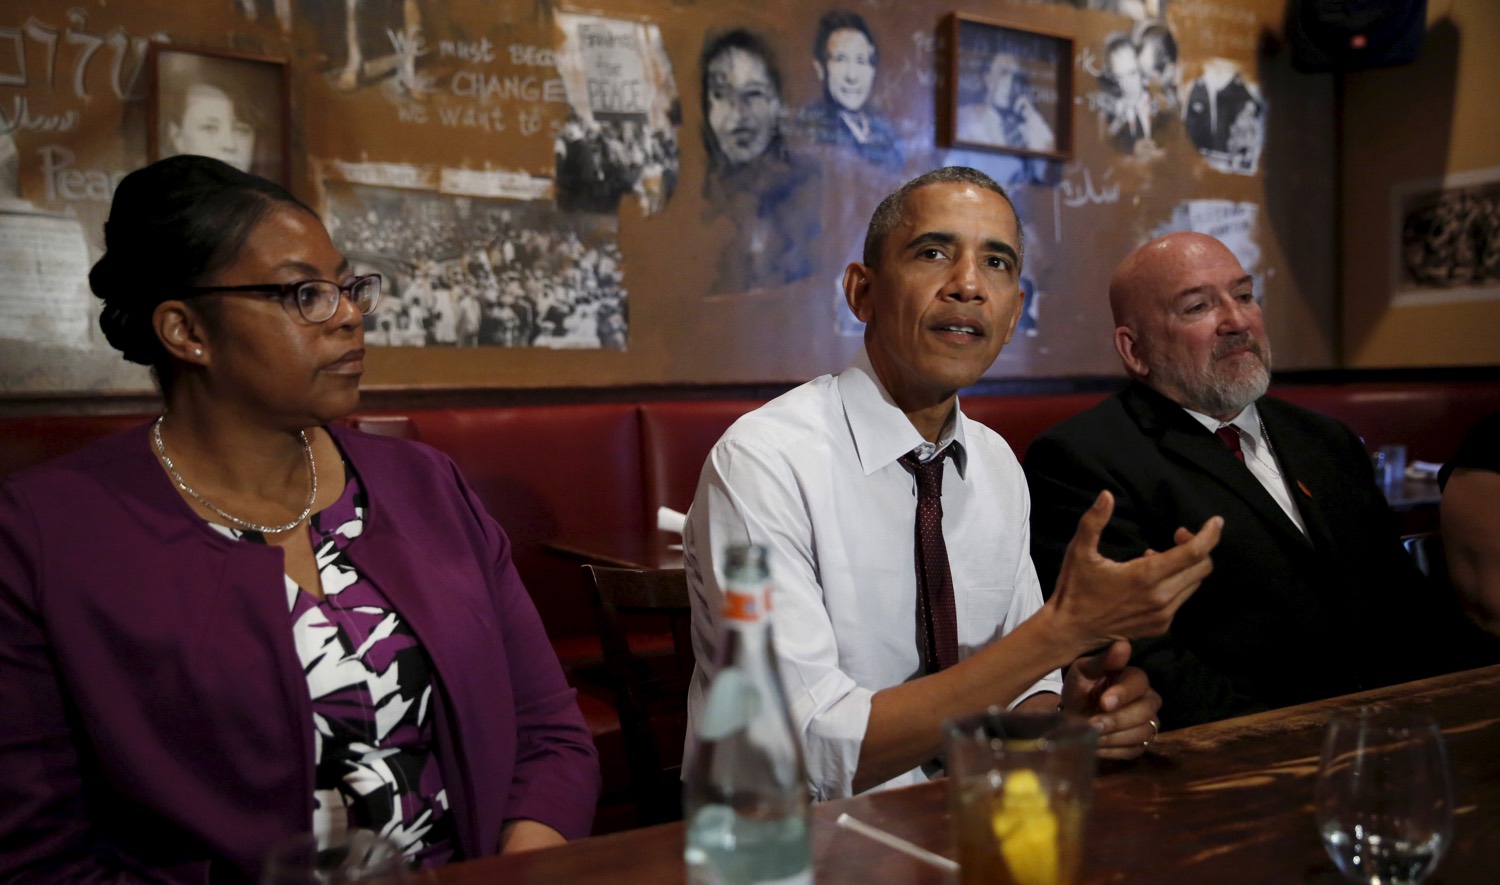 Obama with formerly incarcerated individuals who received commutations from his and previous administrations. March 30, 2016, DC.  With him, former inmates Romana Brant (L) and Phillip Emmert. REUTERS